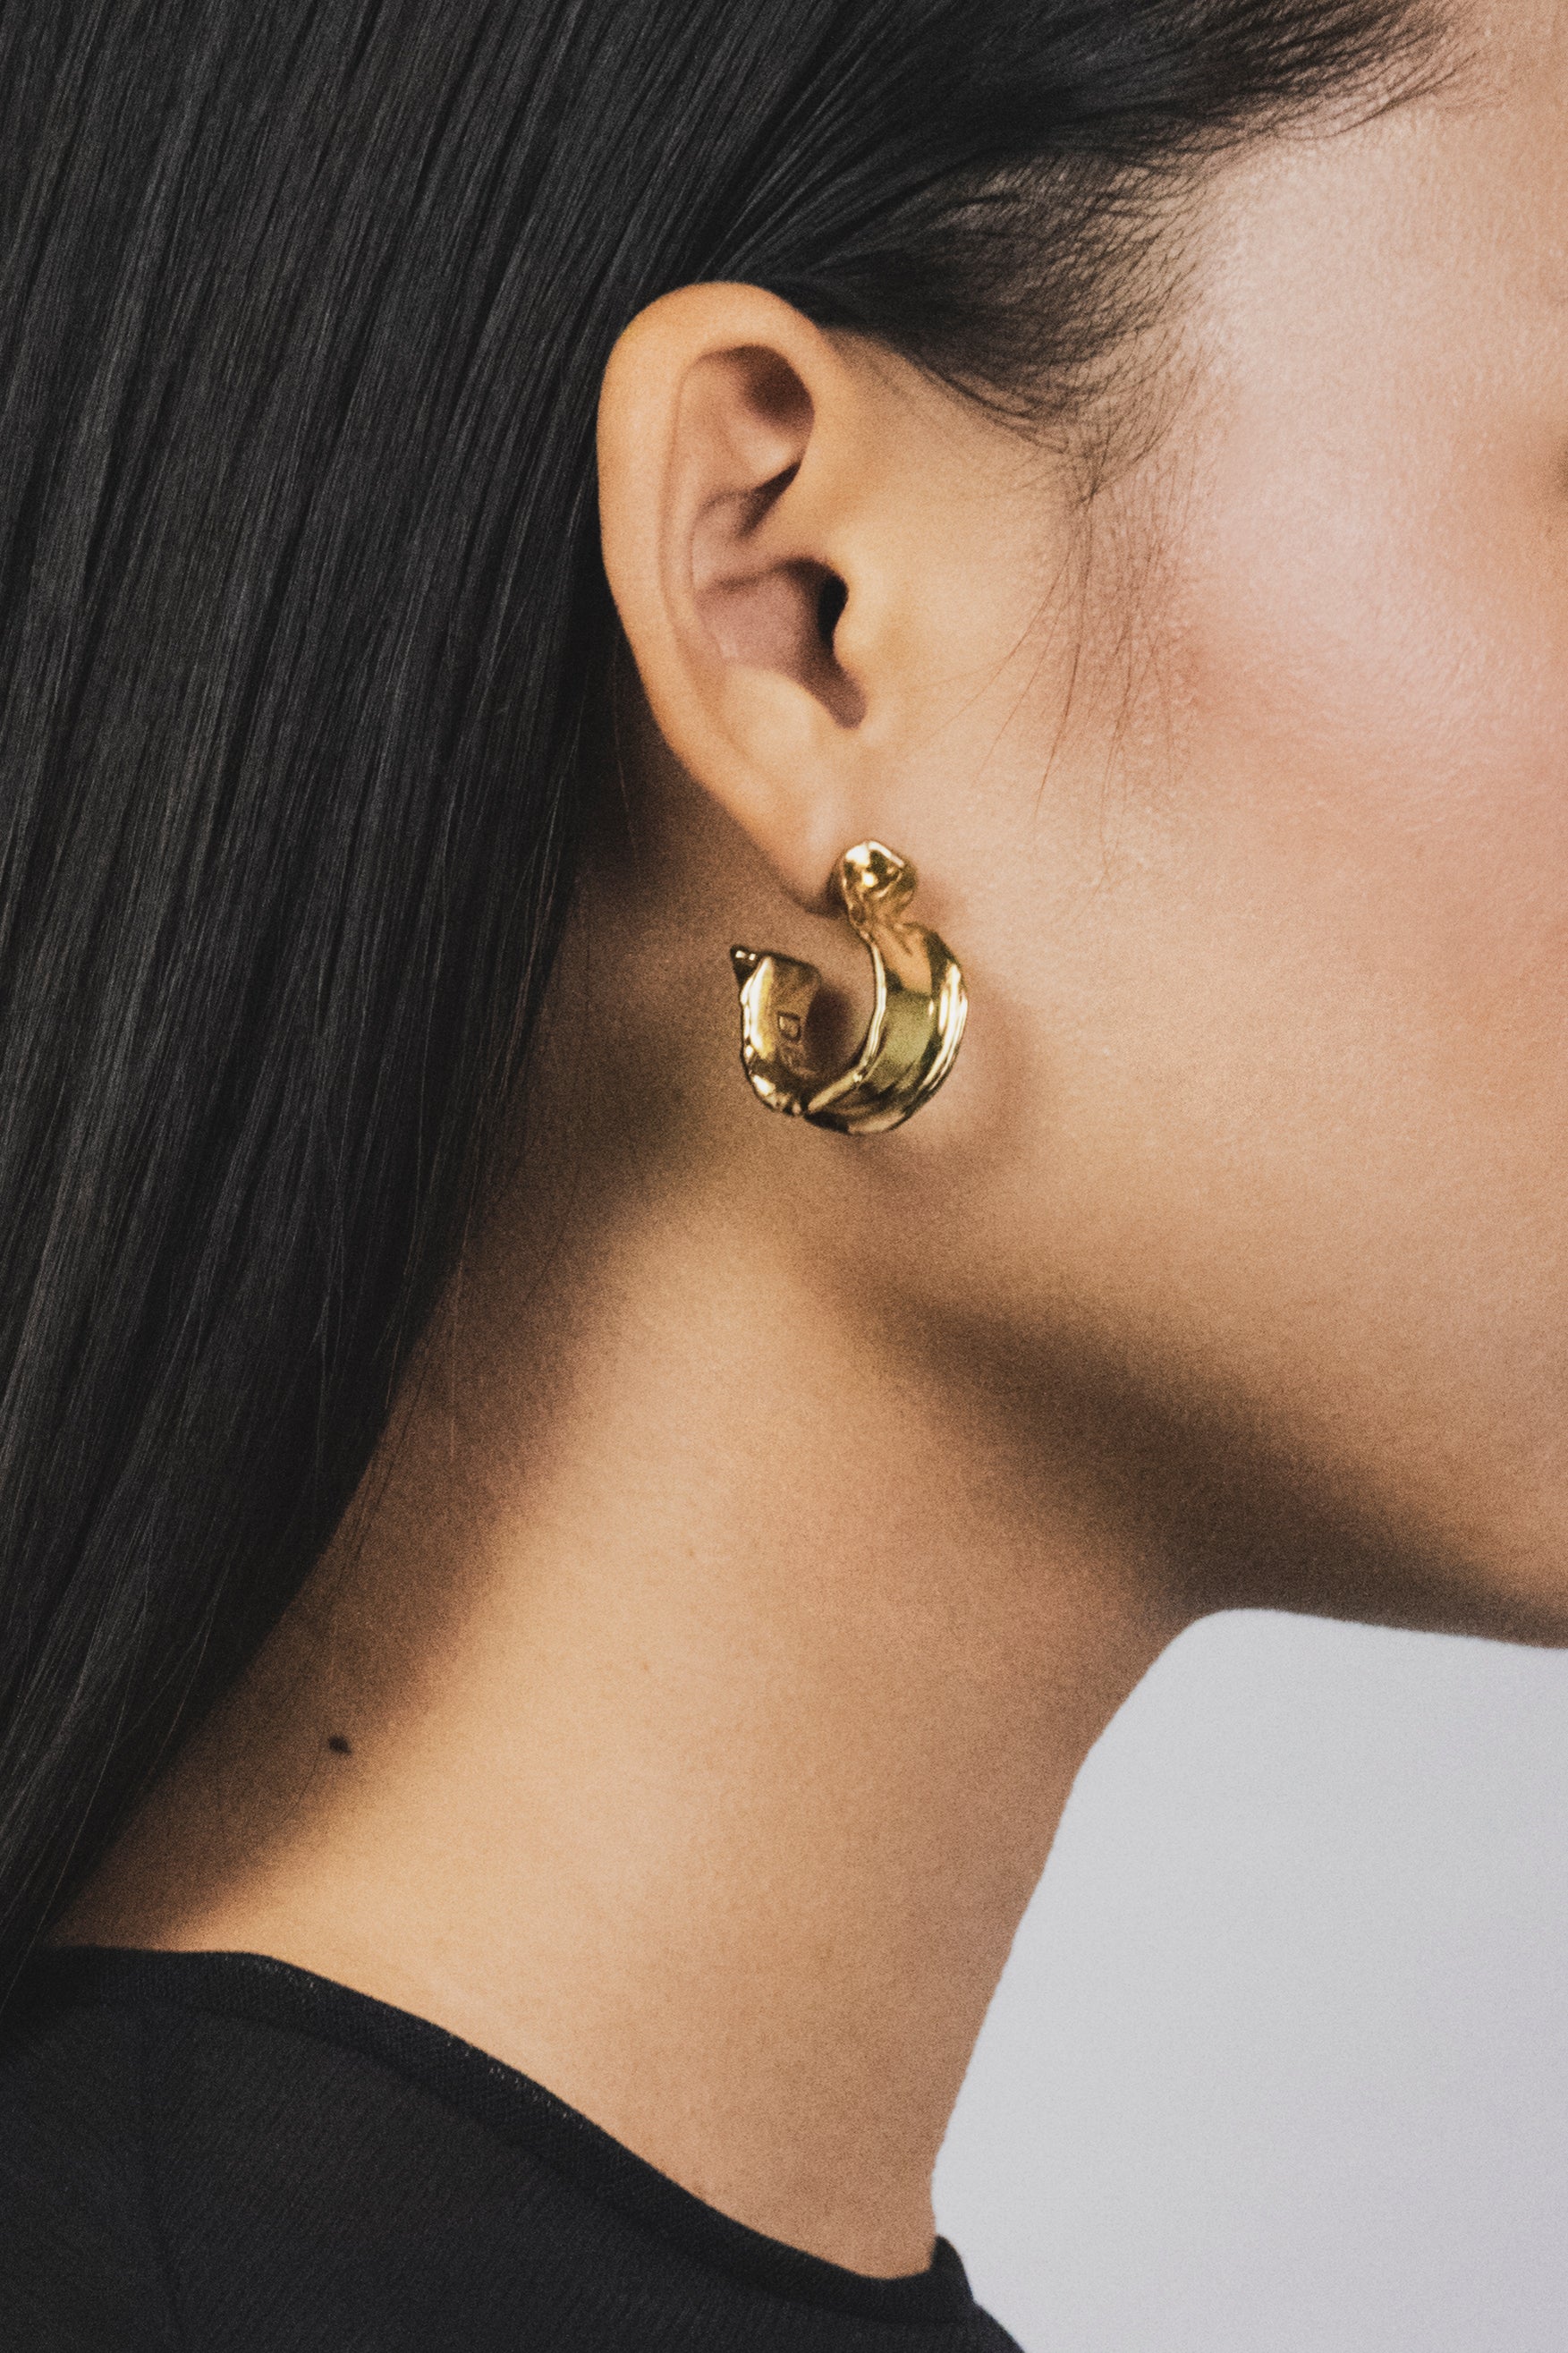 LIL FAÏENCE HOOPS YELLOW GOLD